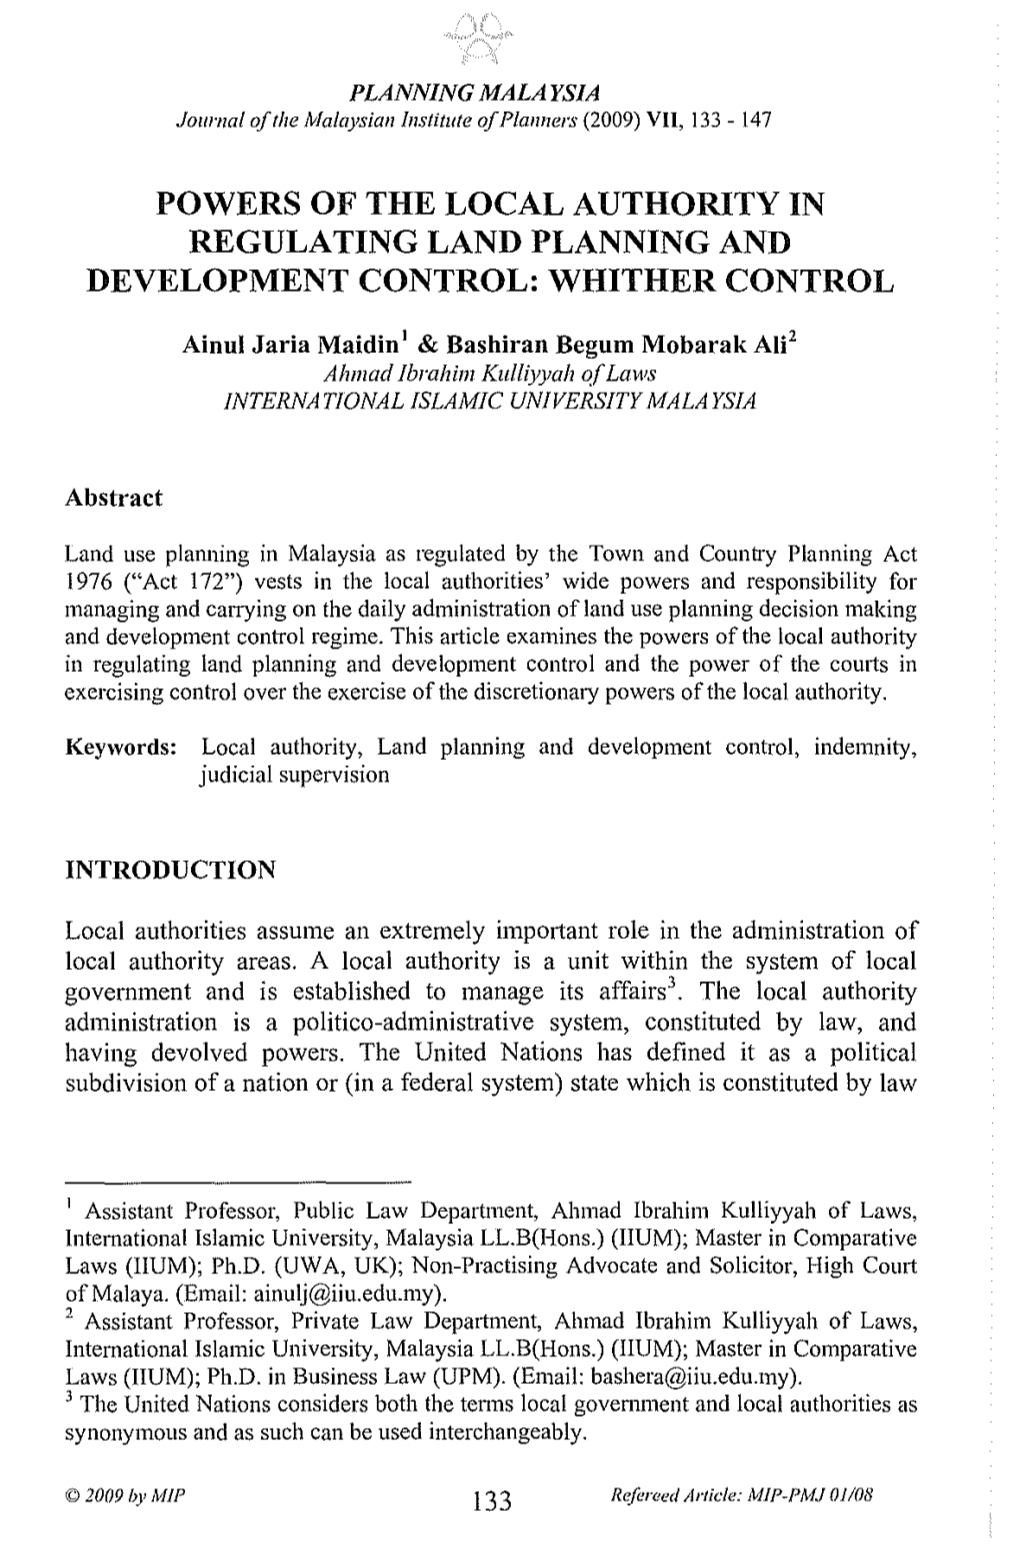 Powers of the Local Authority in Regulating Land Planning and Development Control: Whither Control